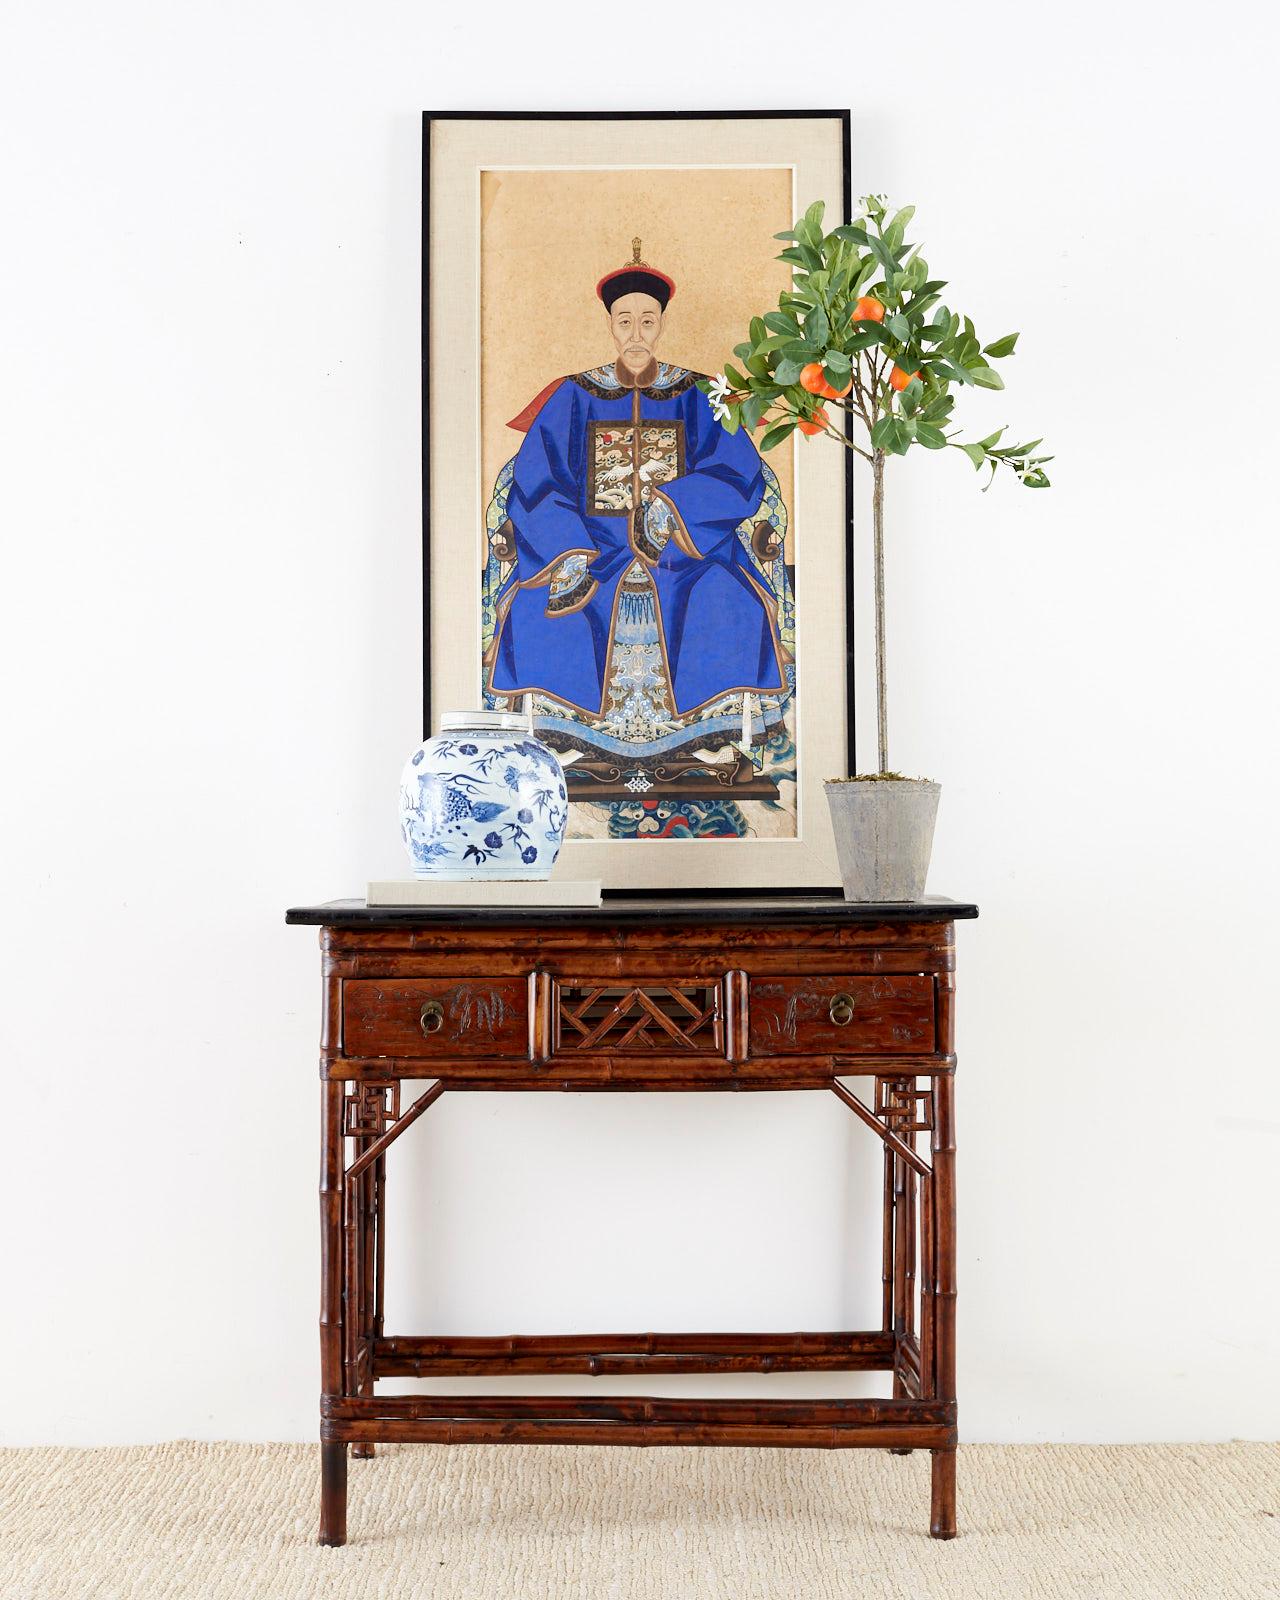 Fantastic bamboo table or writing table desk made in the English Chinese Chippendale chinoiserie taste. Features a case made from bamboo decorated with open fretwork geometric designs. Fronted by two wooden storage drawers with brass ring pulls and